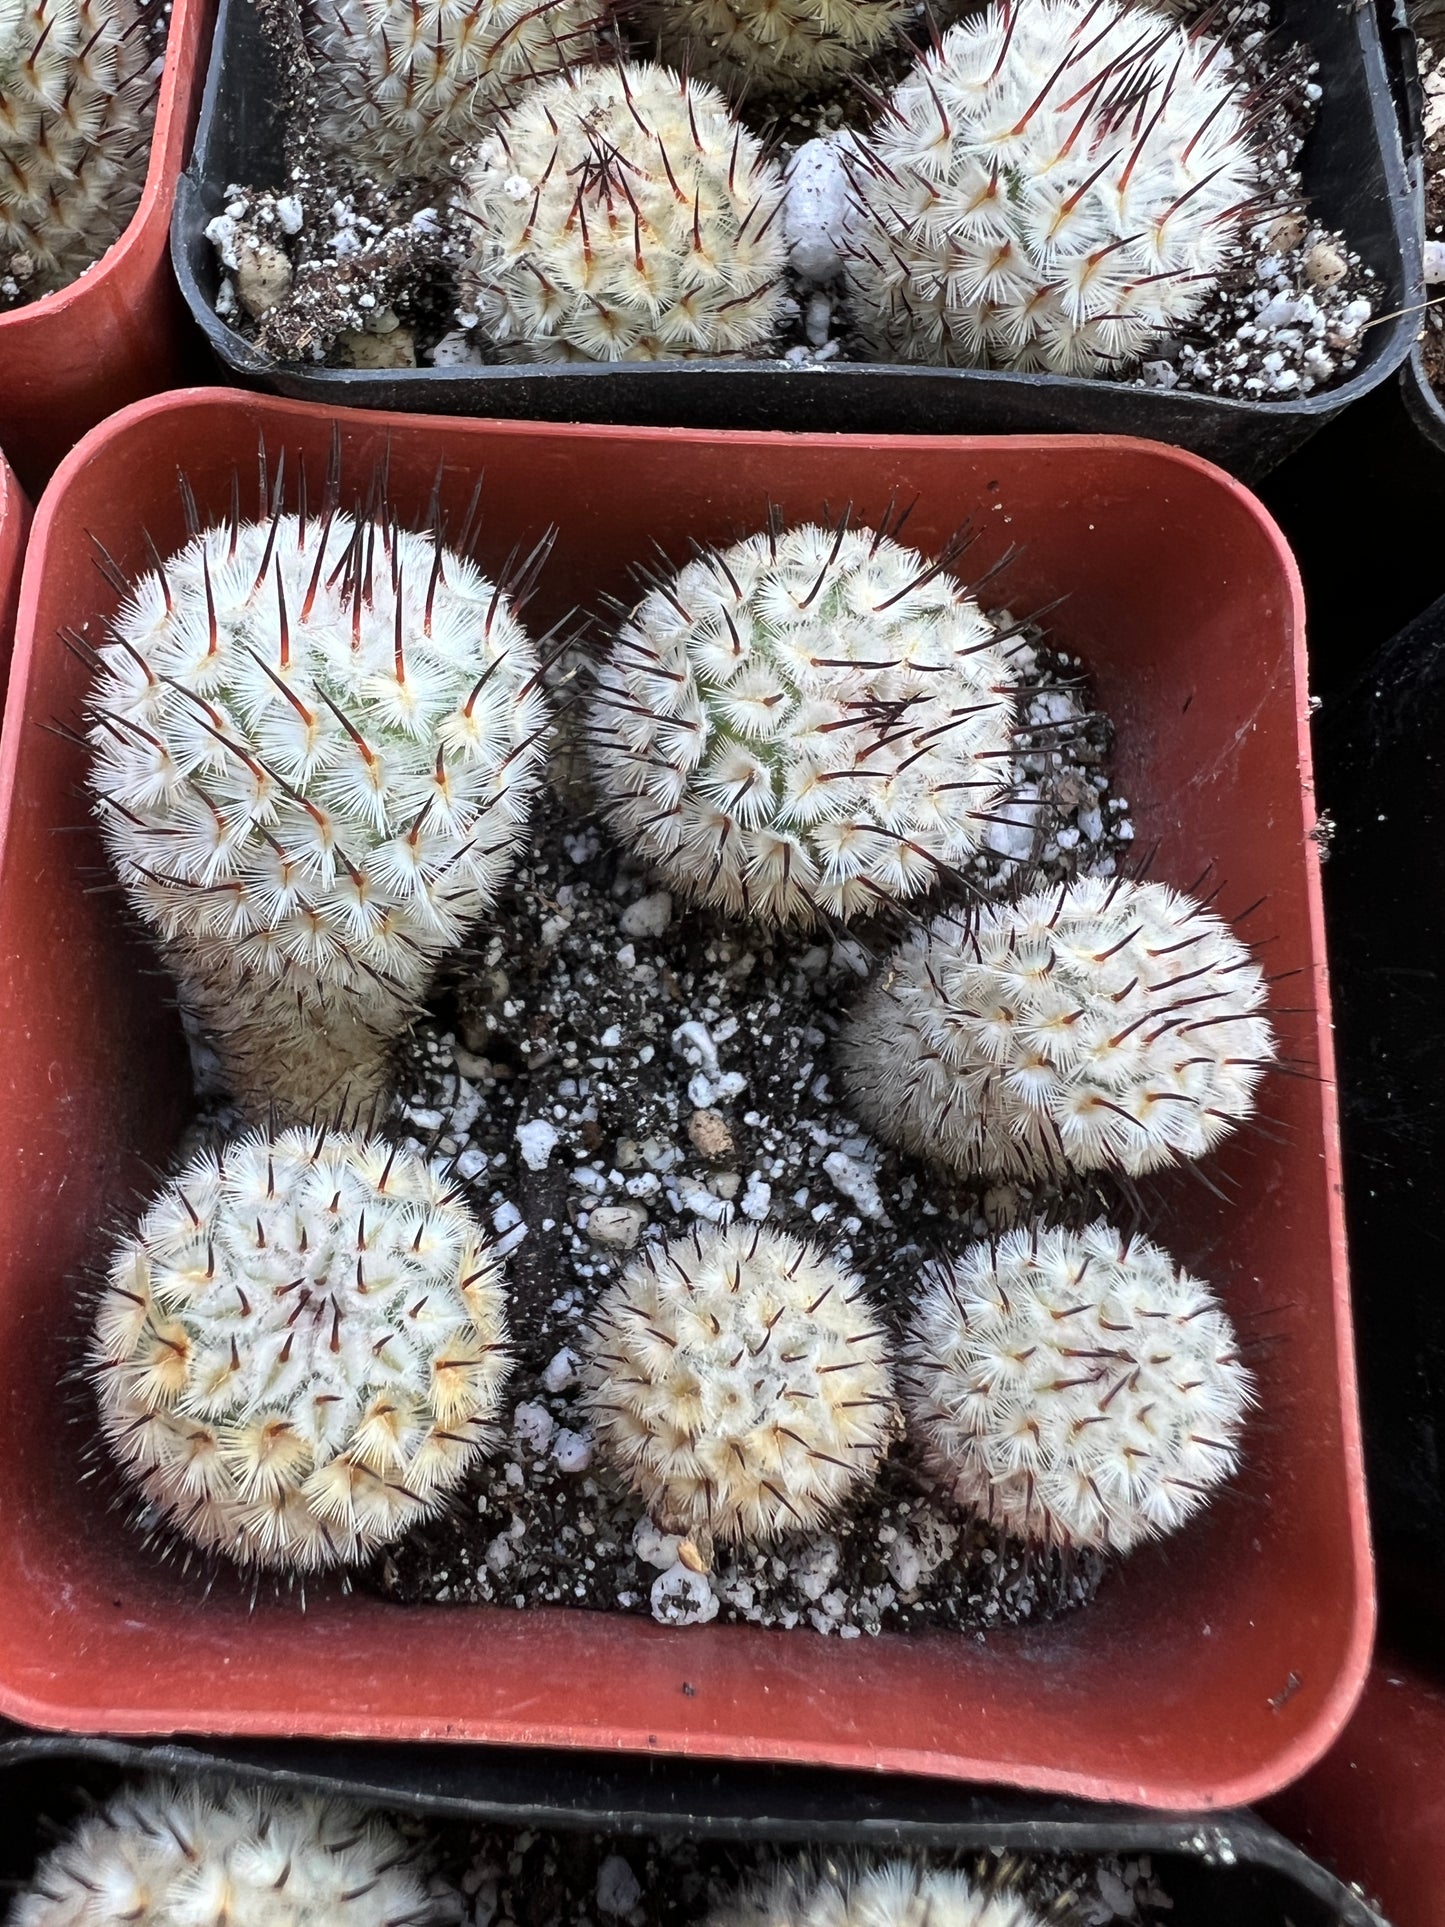 Mammillaria Perezdelarosae v. Andersonii pack of 6 plants for 100$ cheap deal